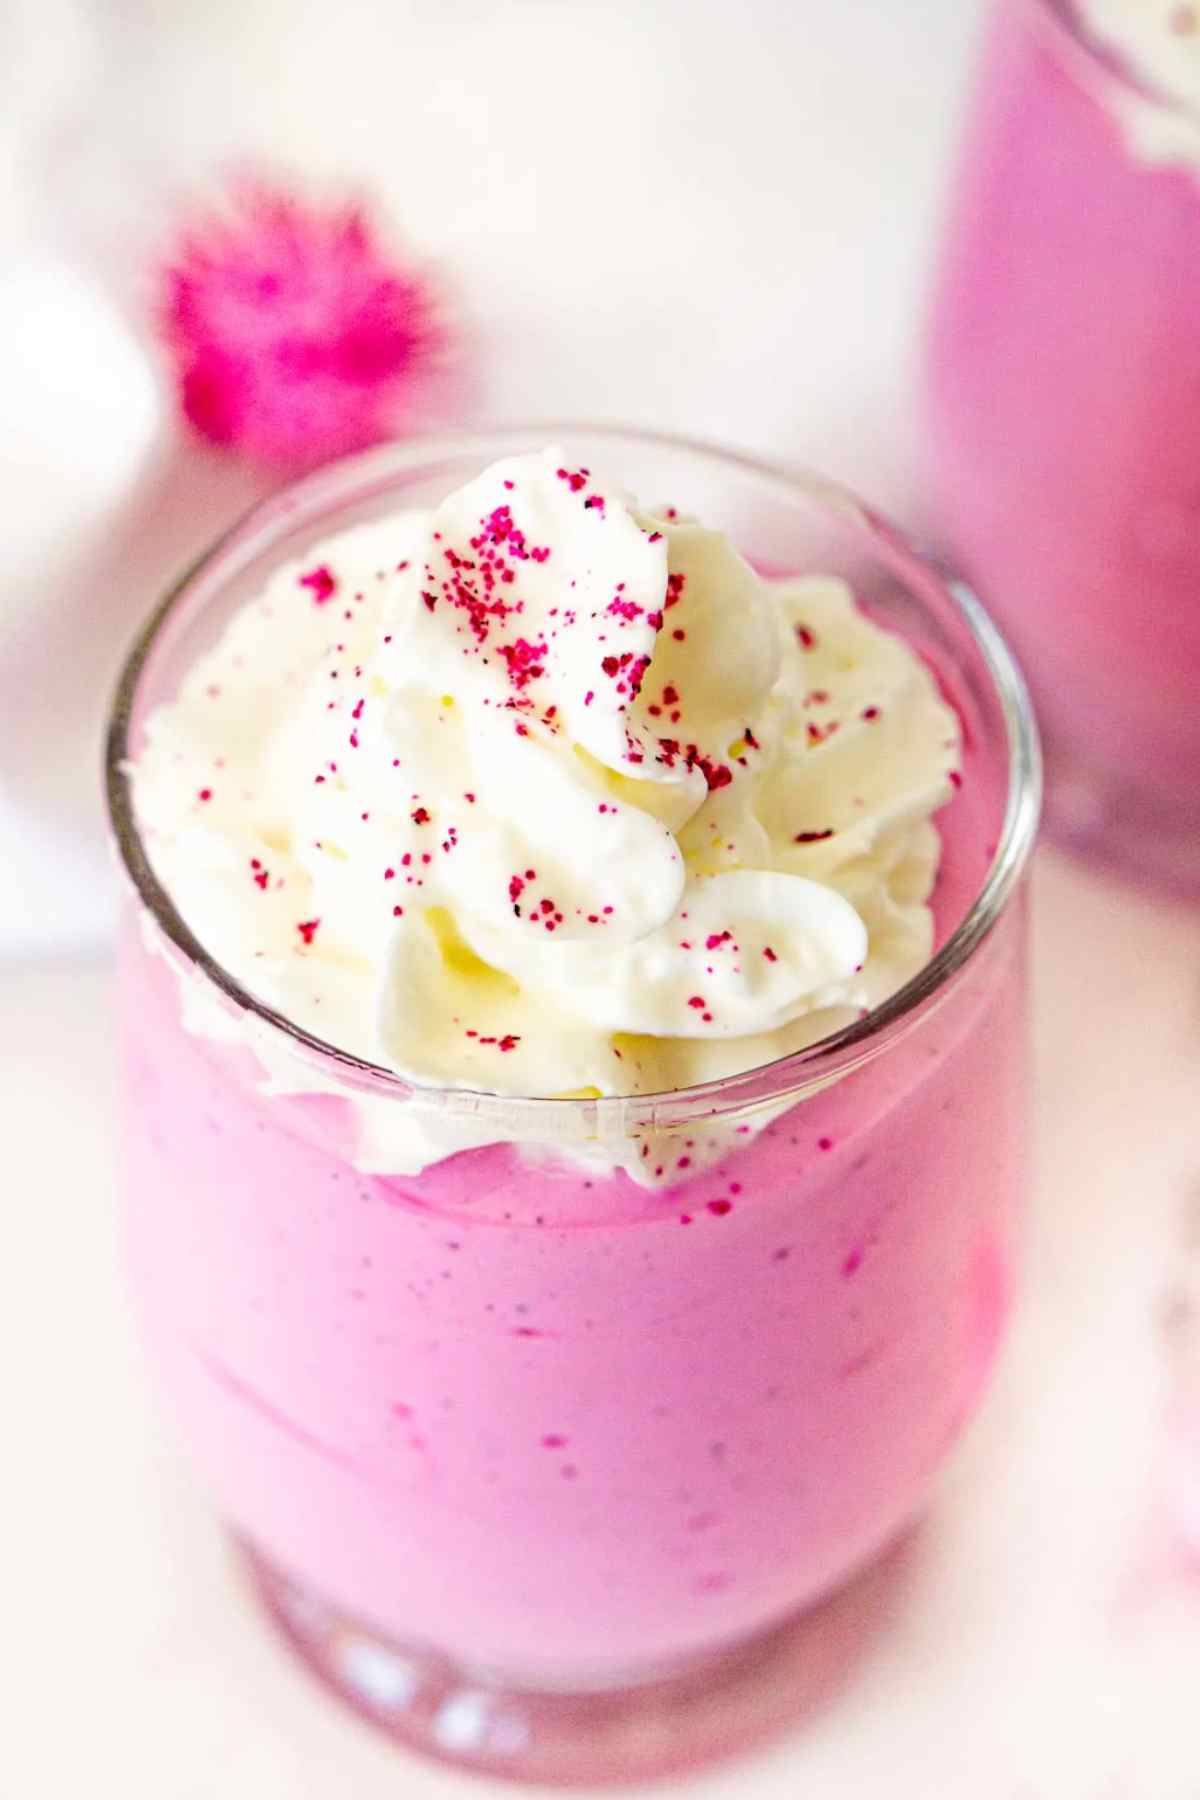 Fuschia colored dragon fruit whipped cottage cheese in a glass topped with whipped cream.